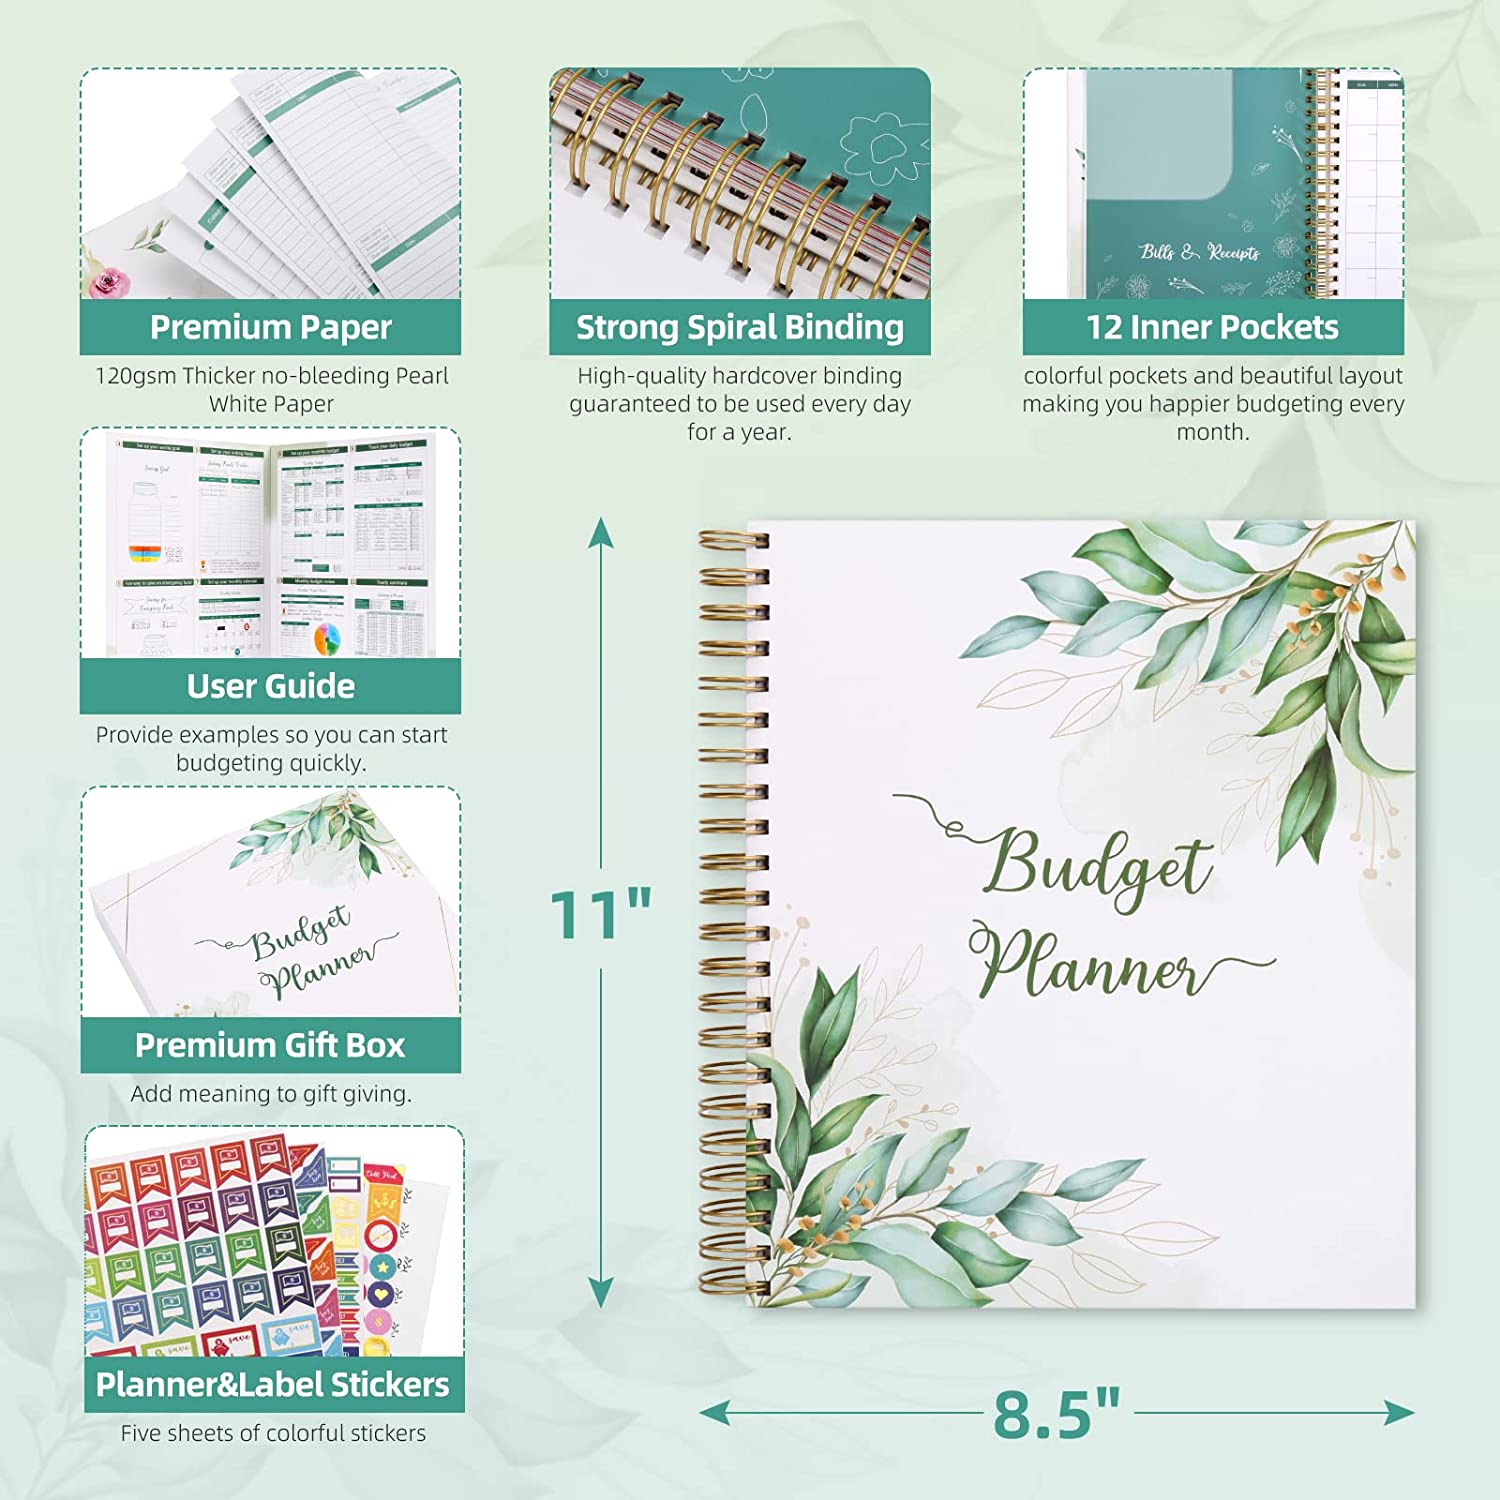 Monthly Budget Planner Book